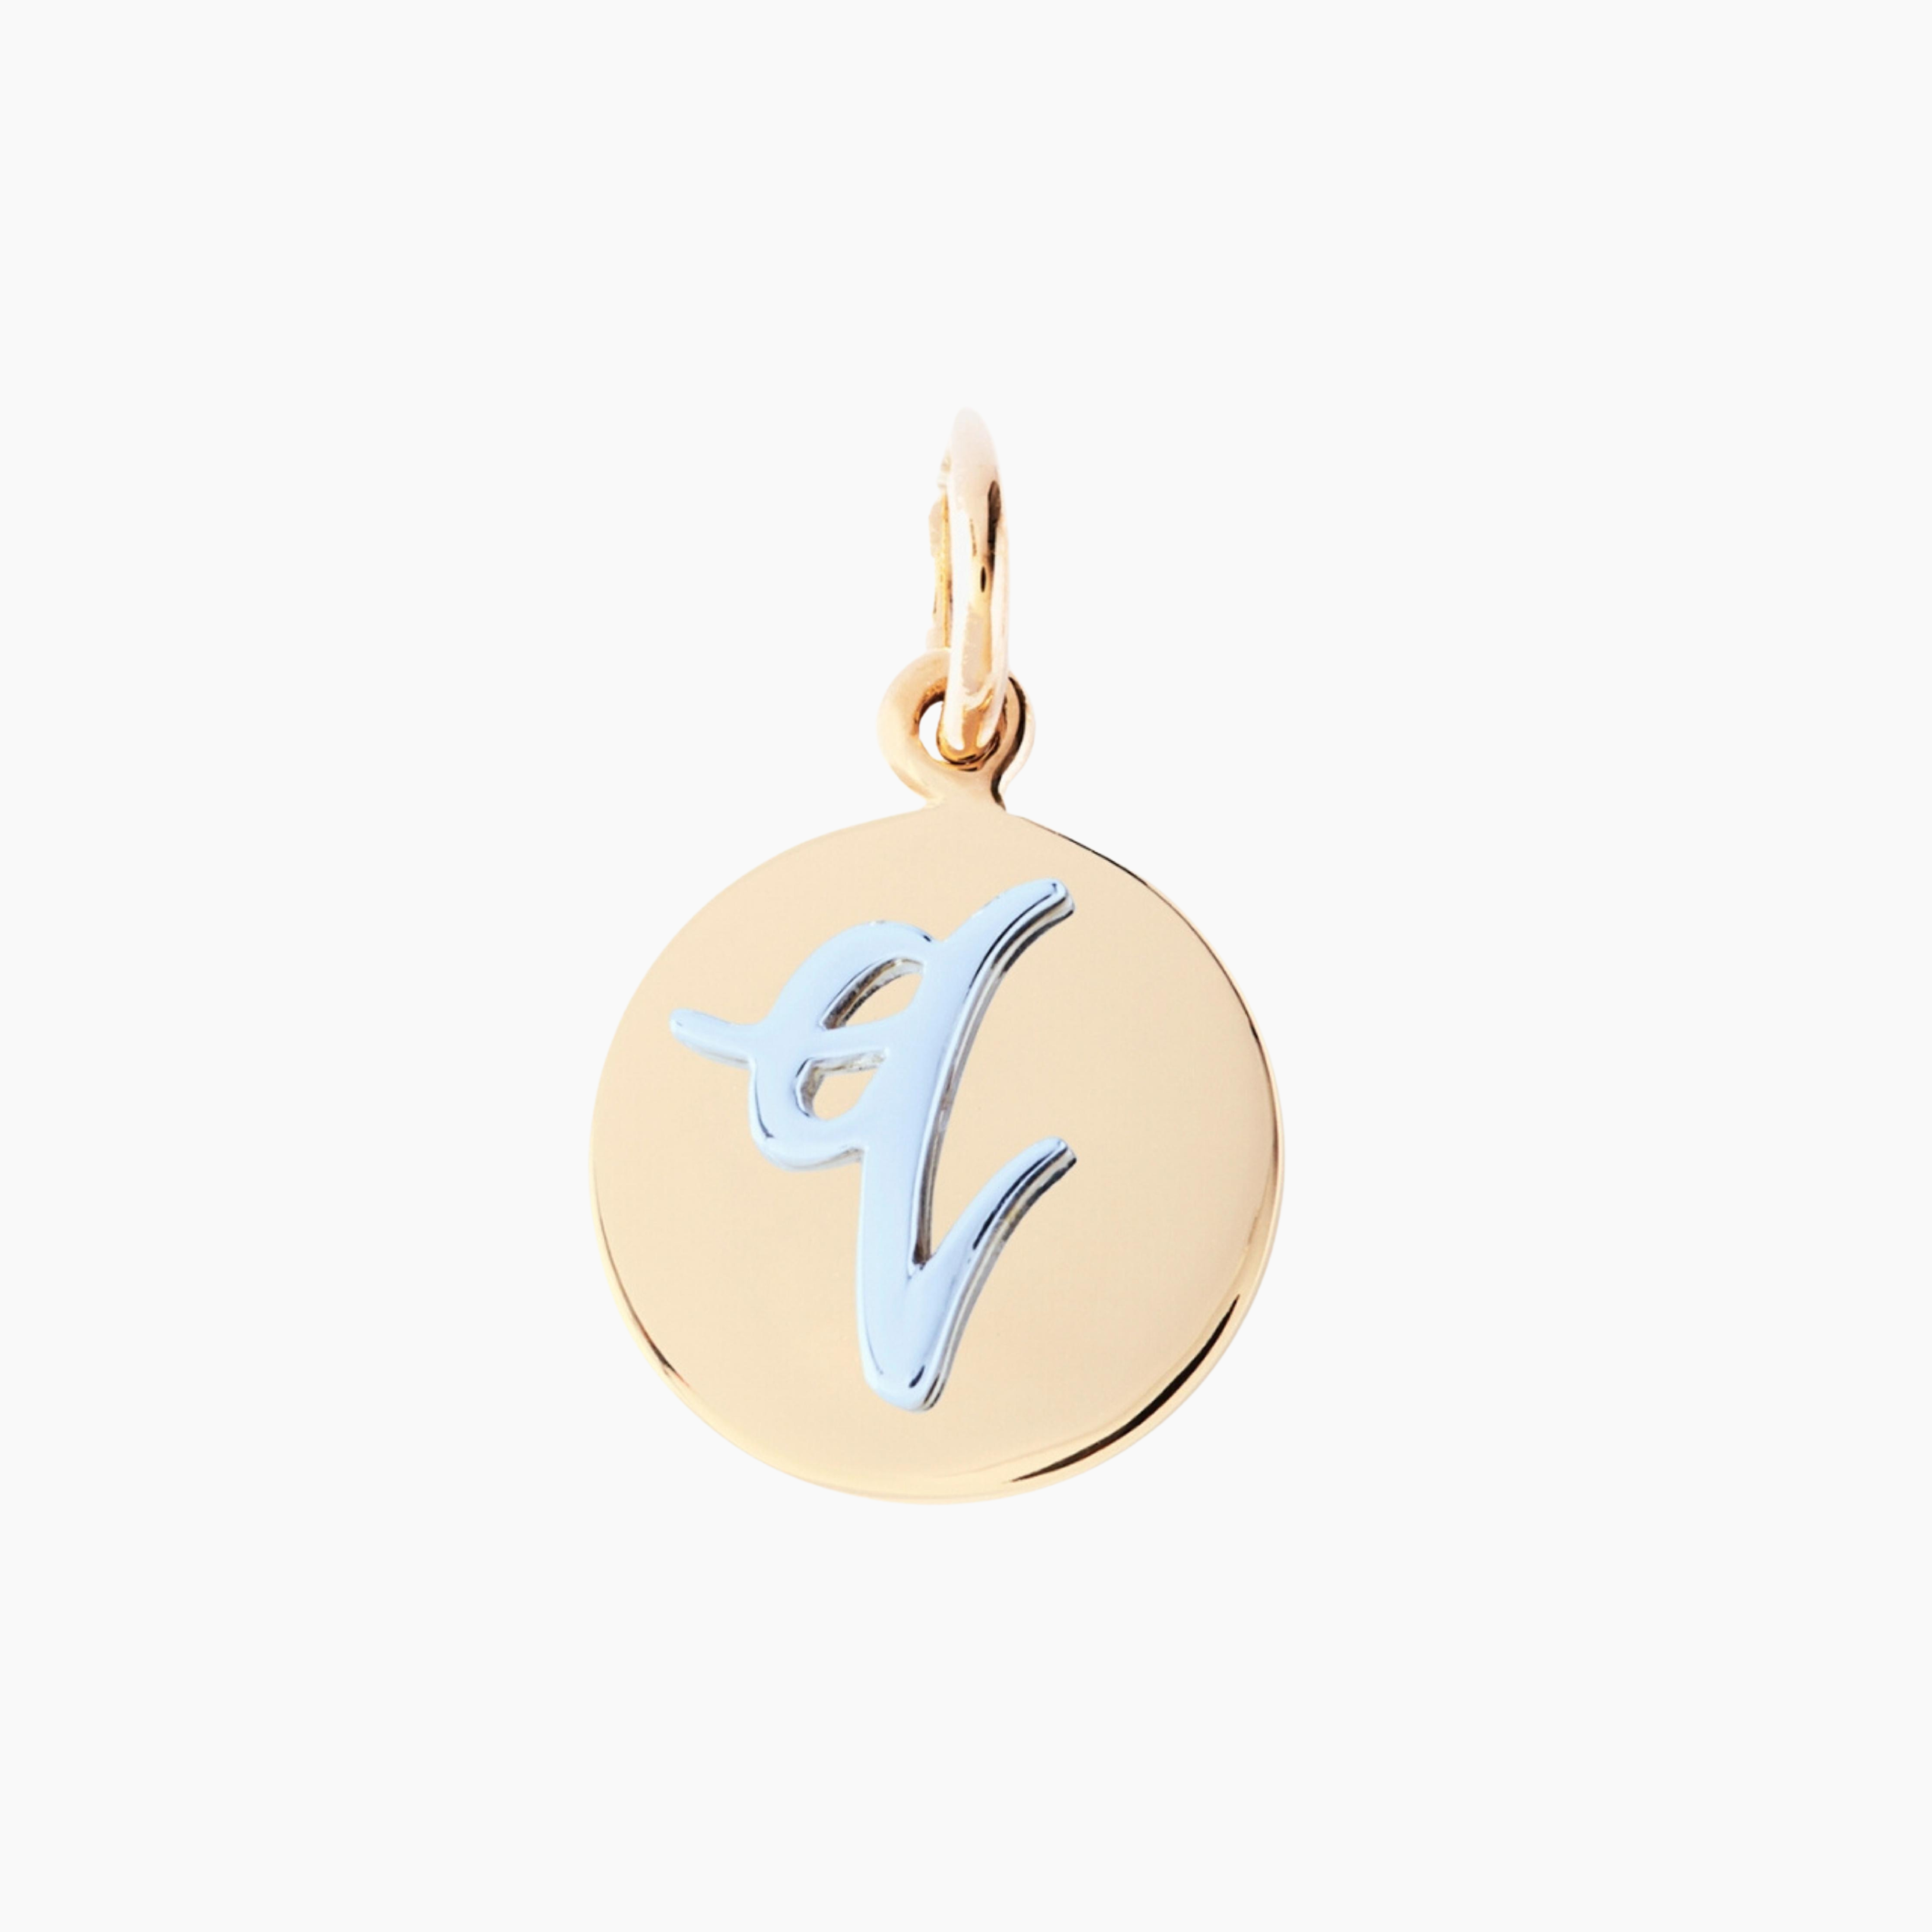 Recognised Q Alphabet Popon Charm - Ethical Gold or Silver